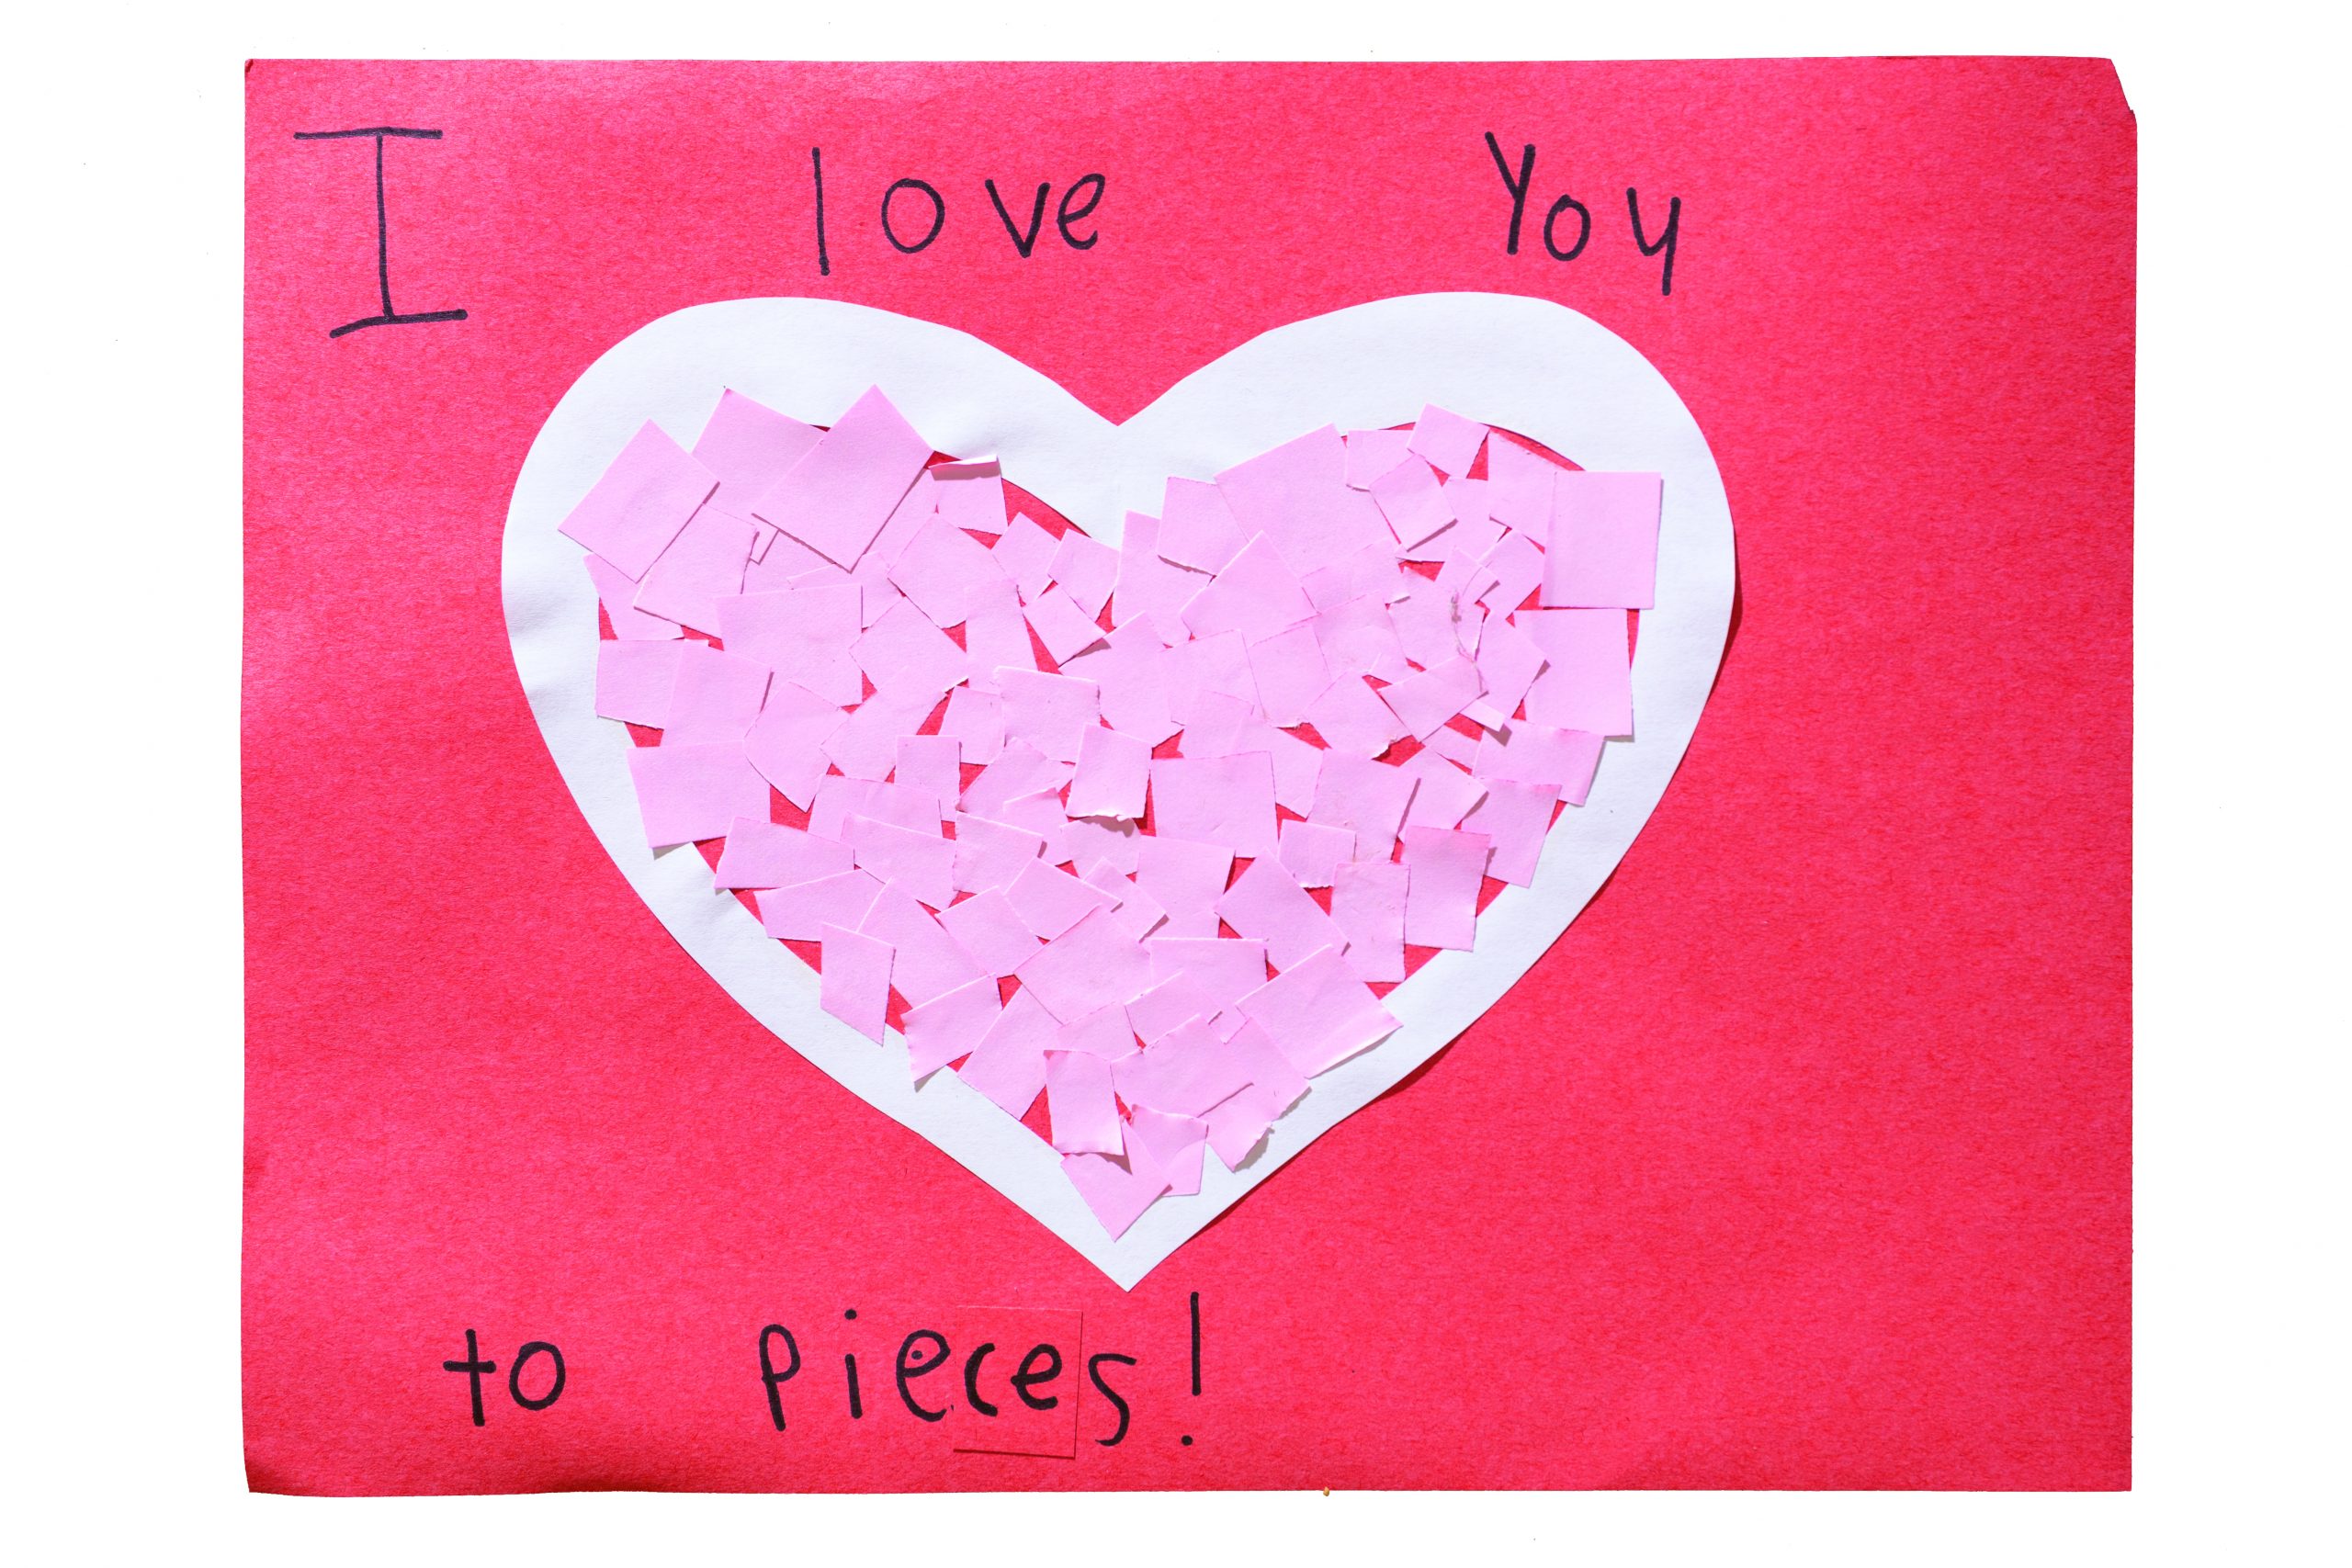 These beautiful valentines are courtesy of Lauren Dasher’s creative third grade class at Brennen Elementary School. 
See her instructions at the end of the article to try making your own with your children this year!